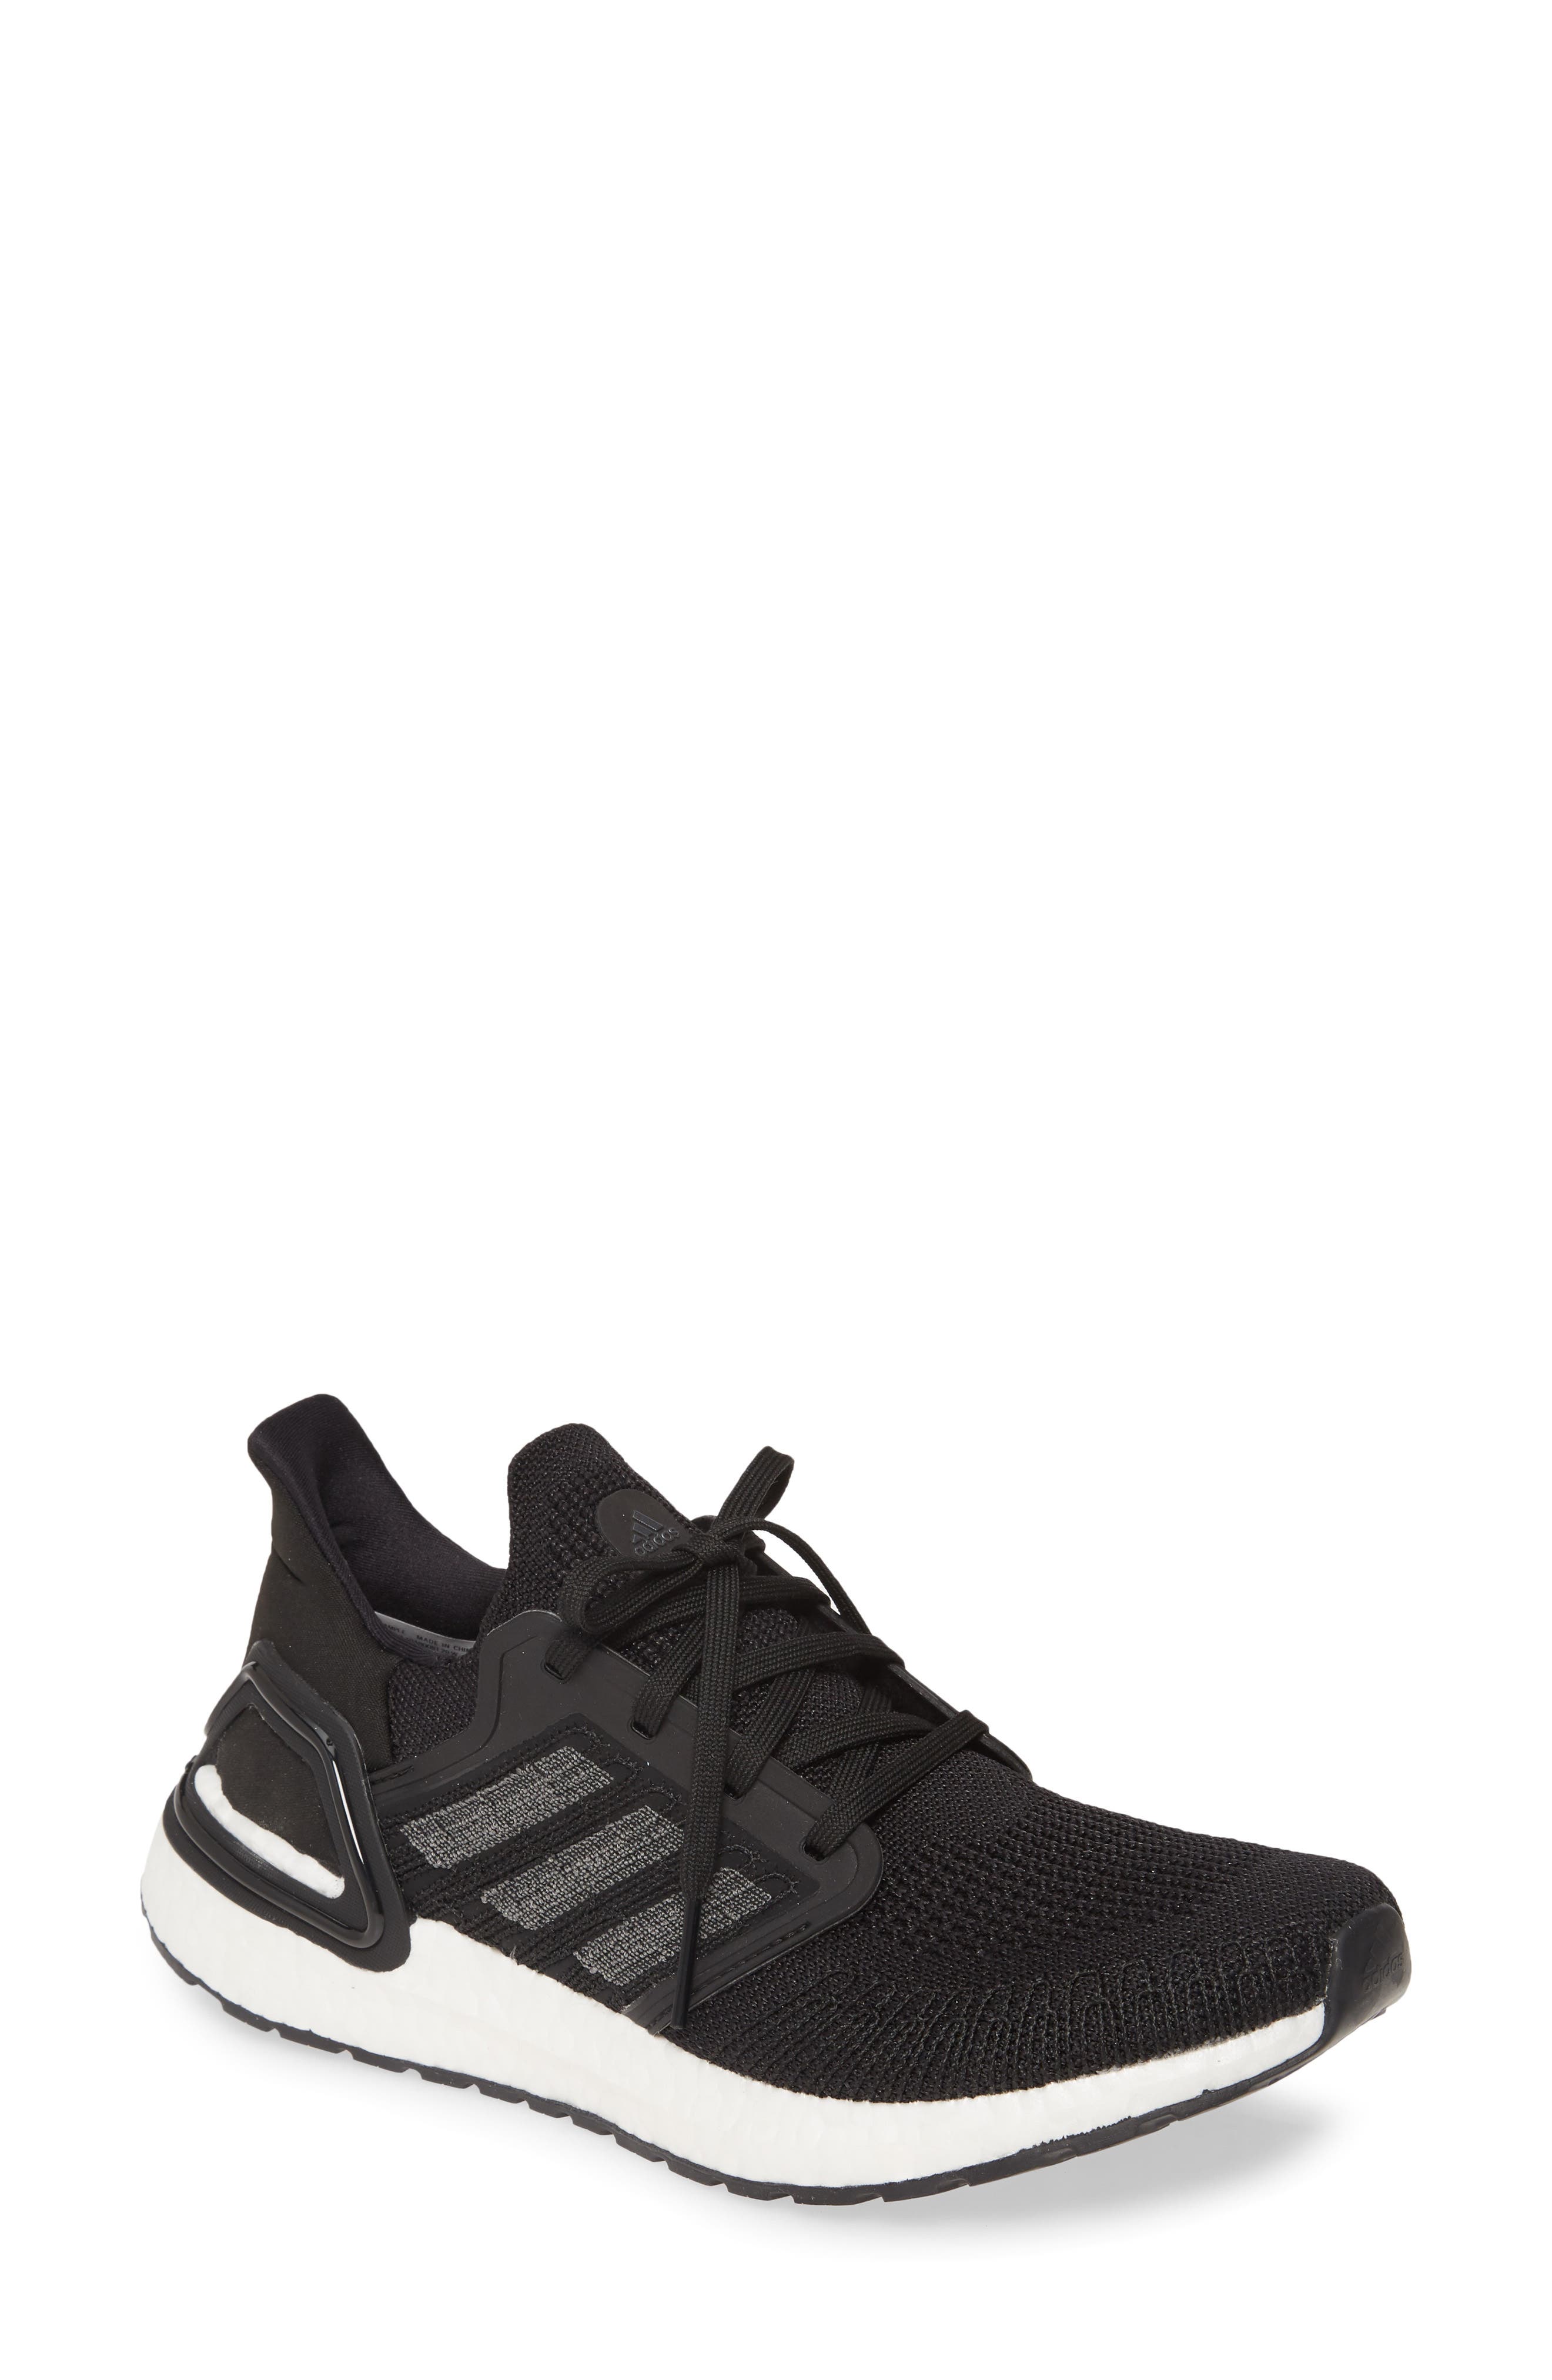 all black adidas running shoes womens